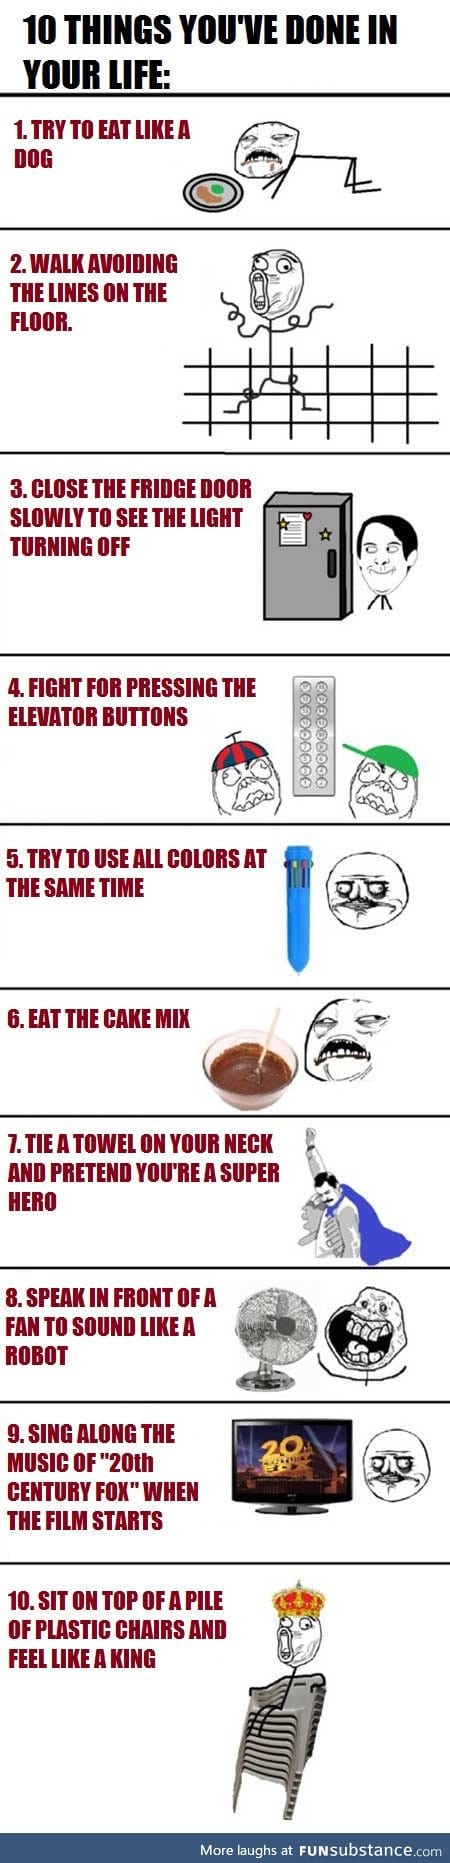 10 Things you've probably done in your childhood